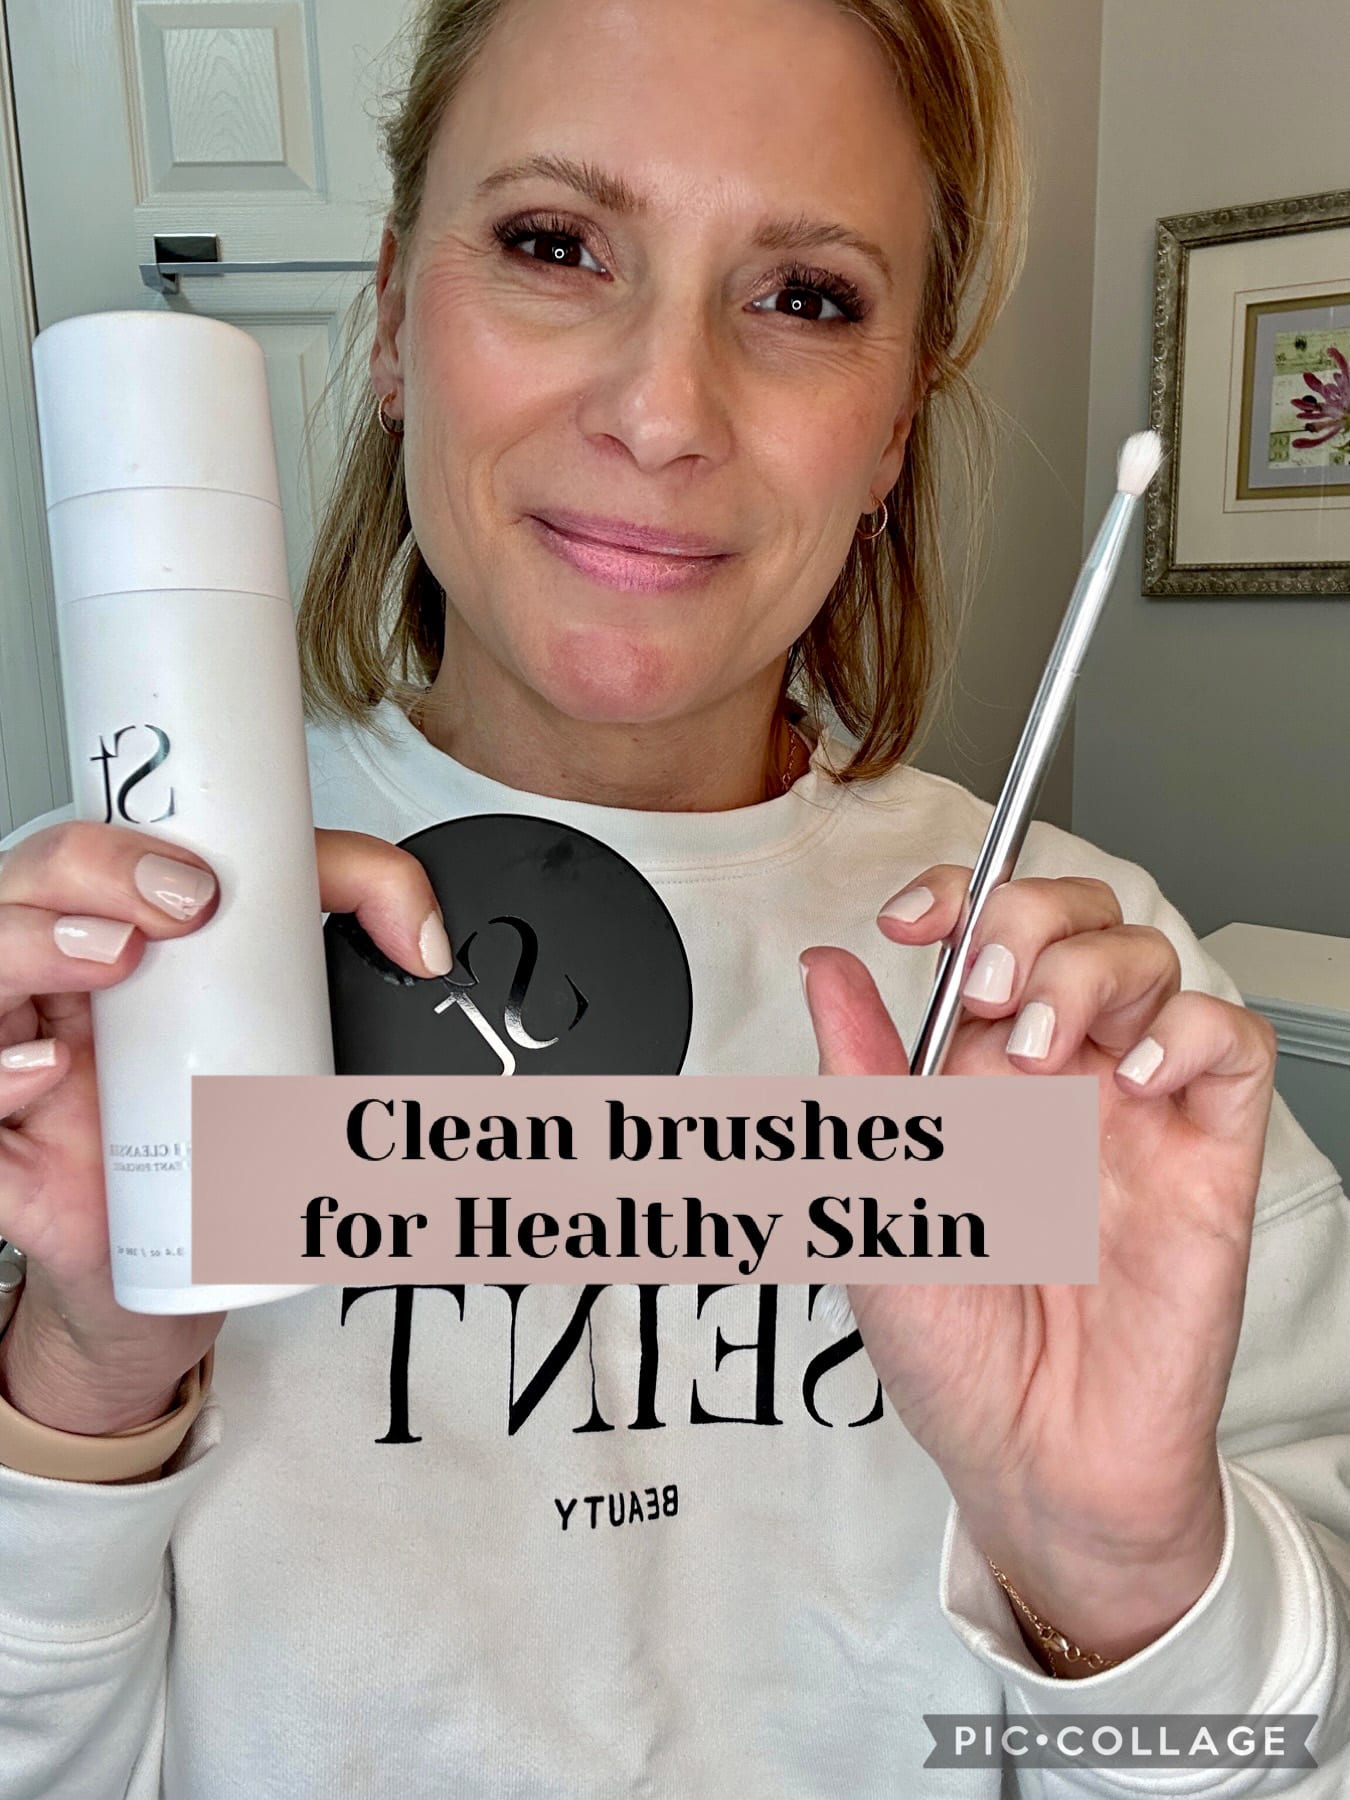 Seint Brush Cleaner – Clean Your Brushes for Healthier Skin